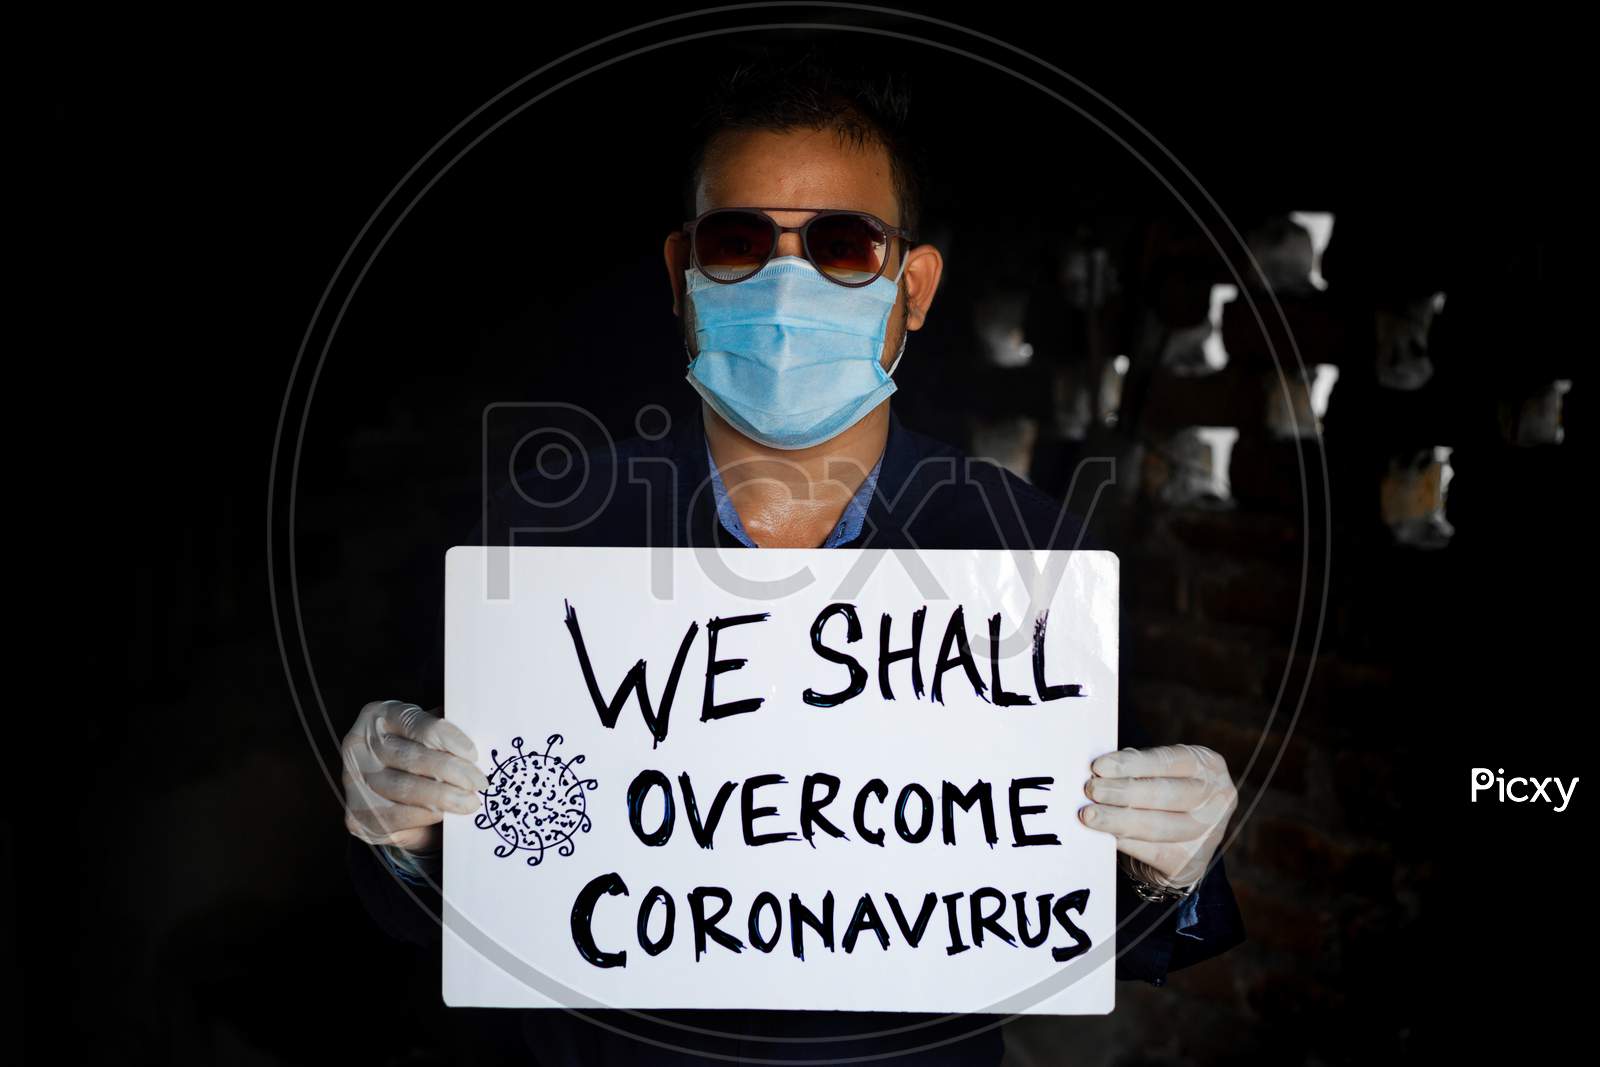 A Young Man Wearing A Medical Mask And Safety Gloves Stands With A Placard Message To "We Shall Overcome Coronavirus". A Man Holding A Placard Massage.